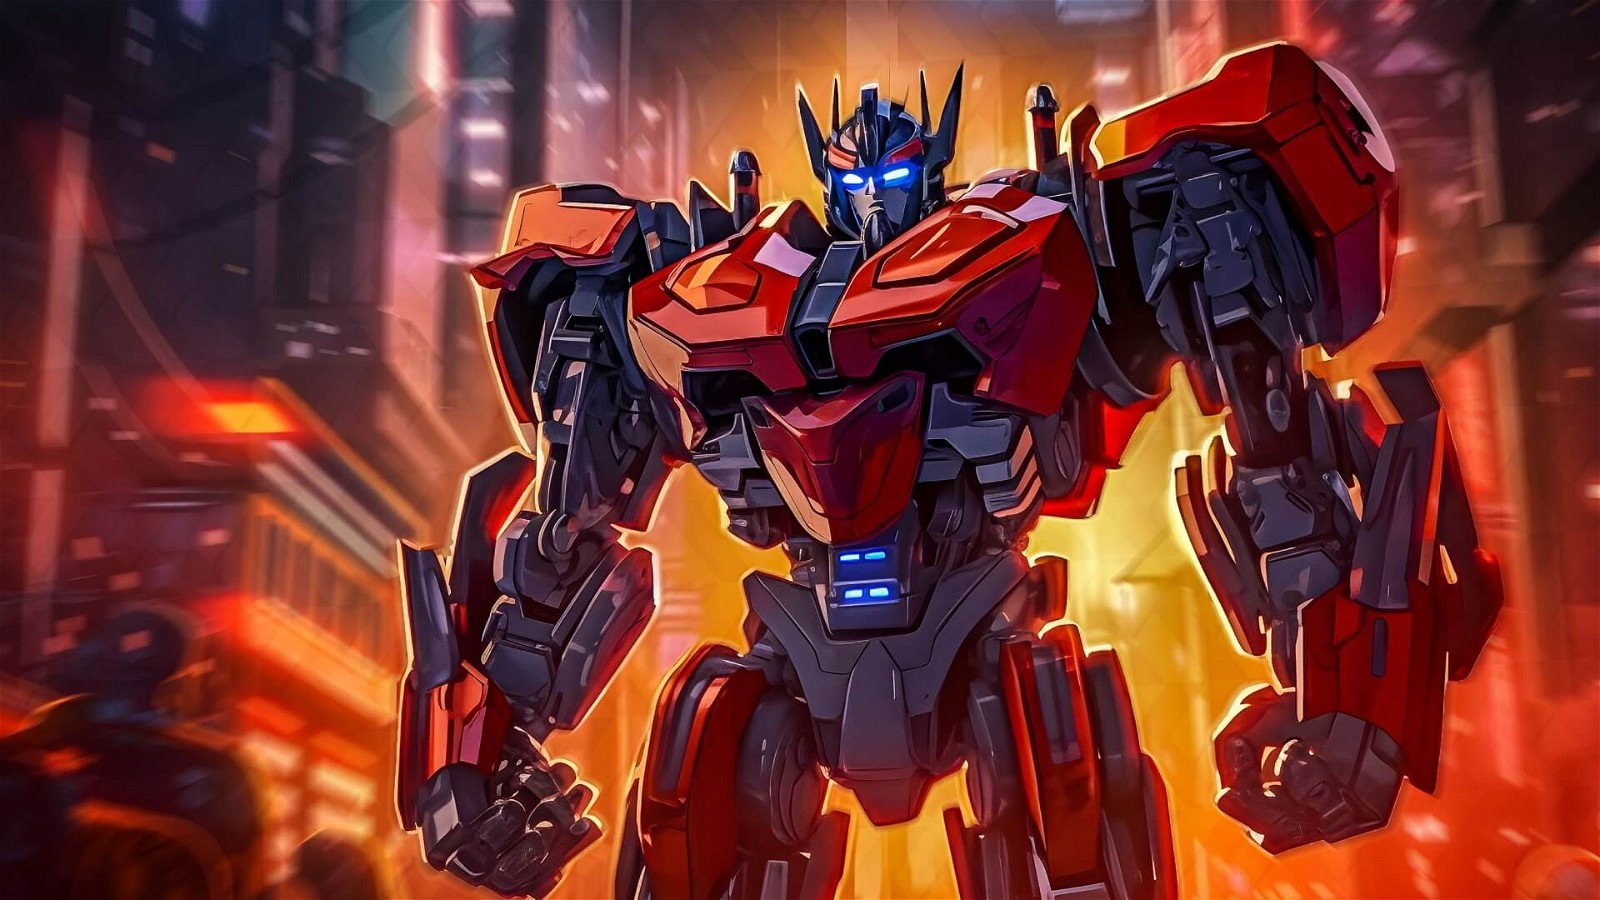 Transformers One takes Dune as an example to build the huge world of Cybertron